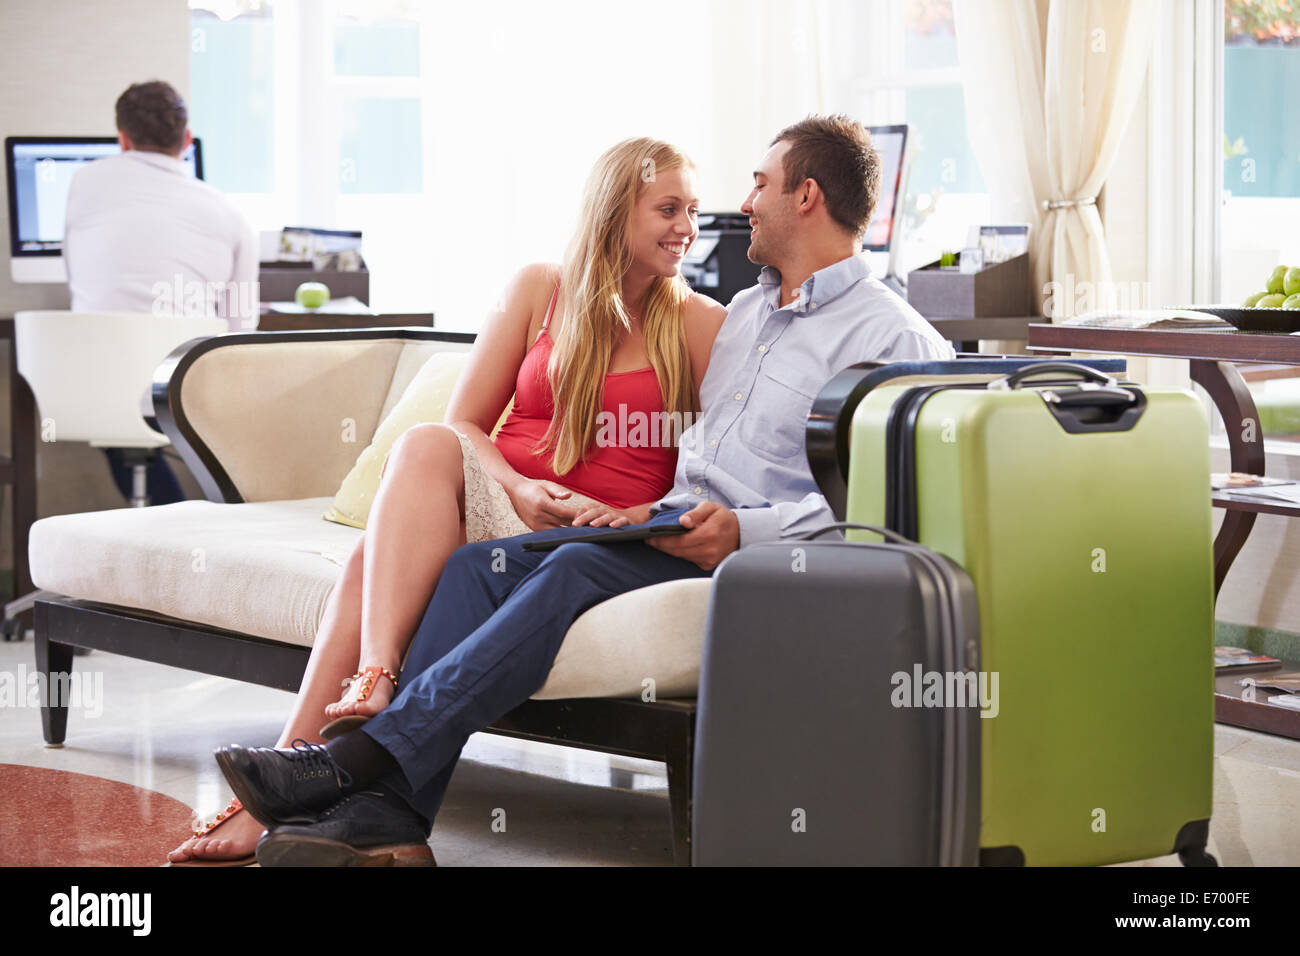 Couple Sitting In Hotel Lobby With Luggage Stock Photo